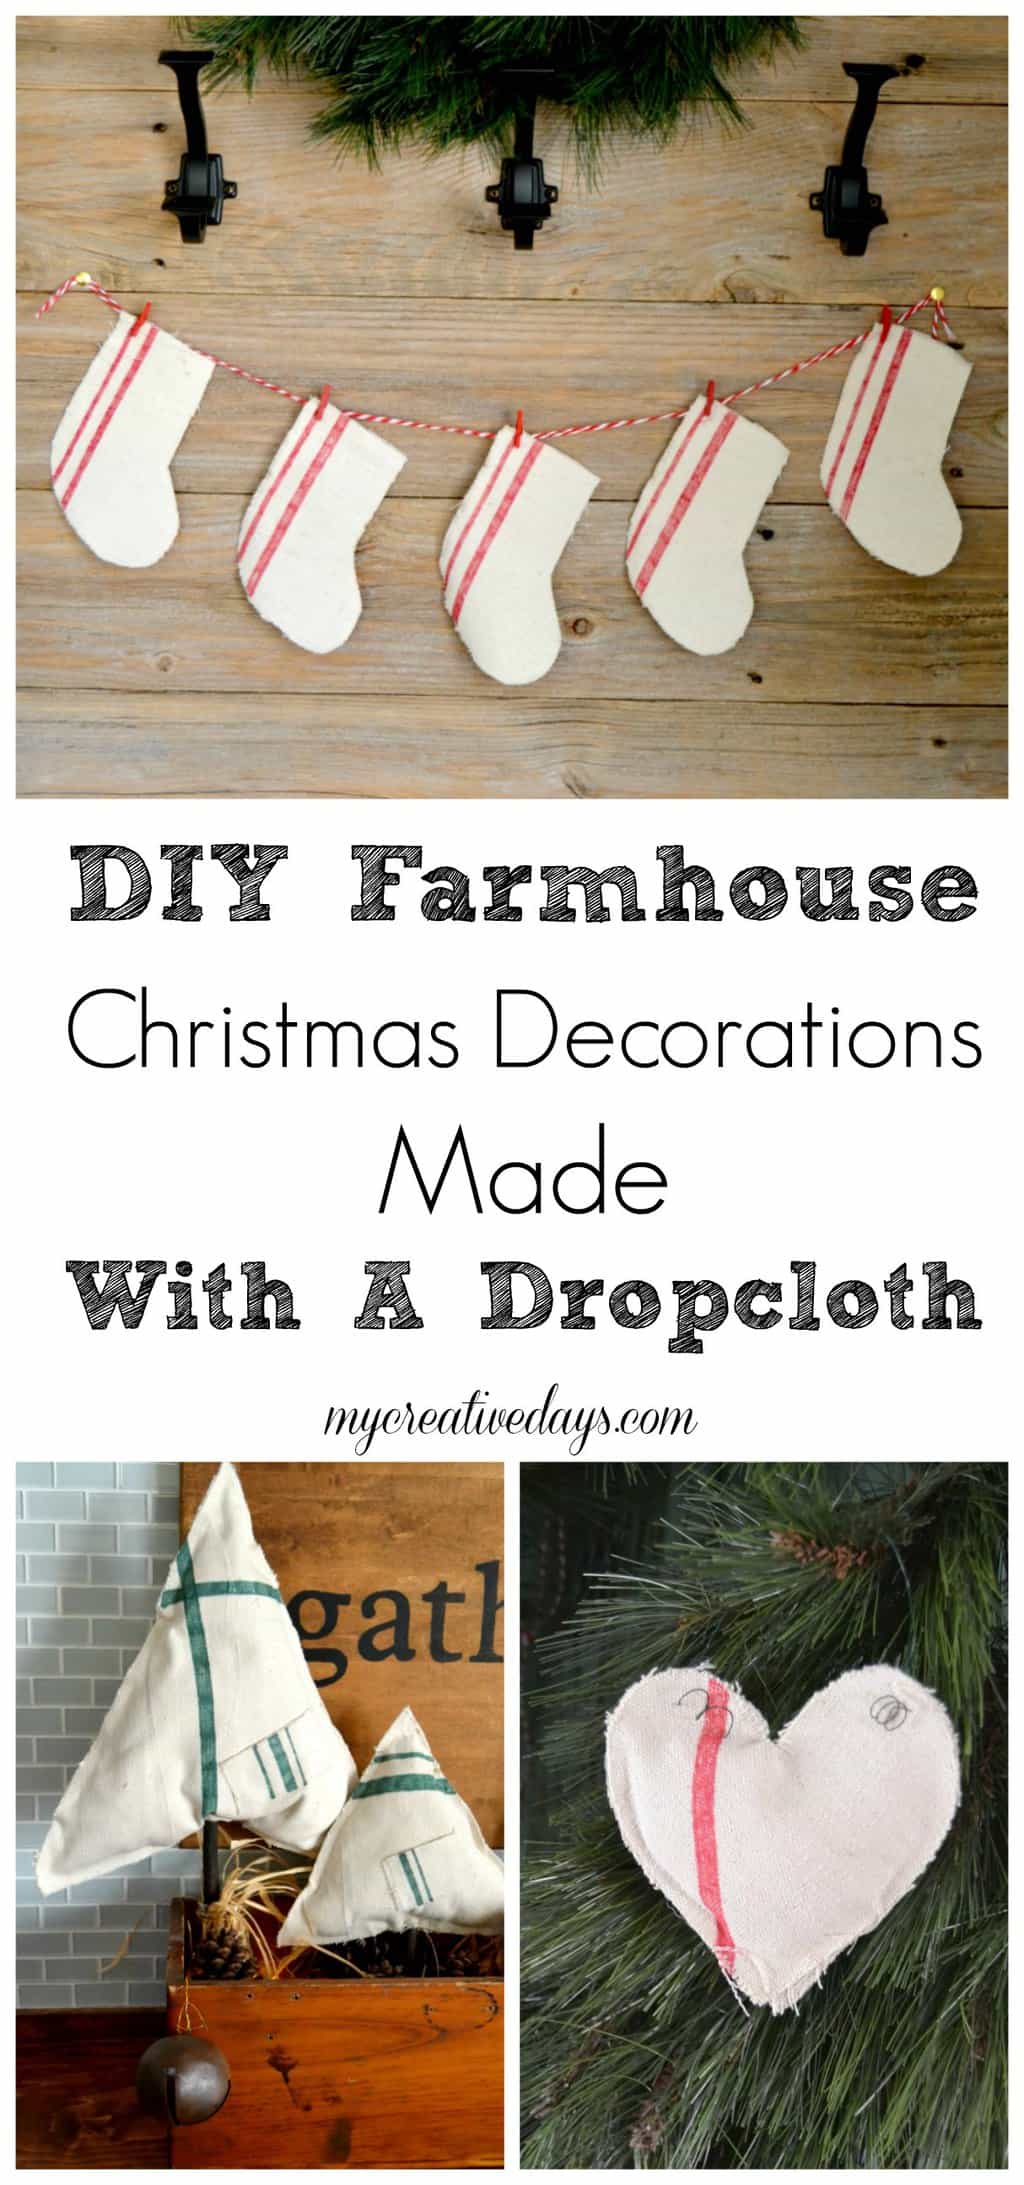 DIY Personalized Drop Cloth Christmas Stockings • Crafting my Home